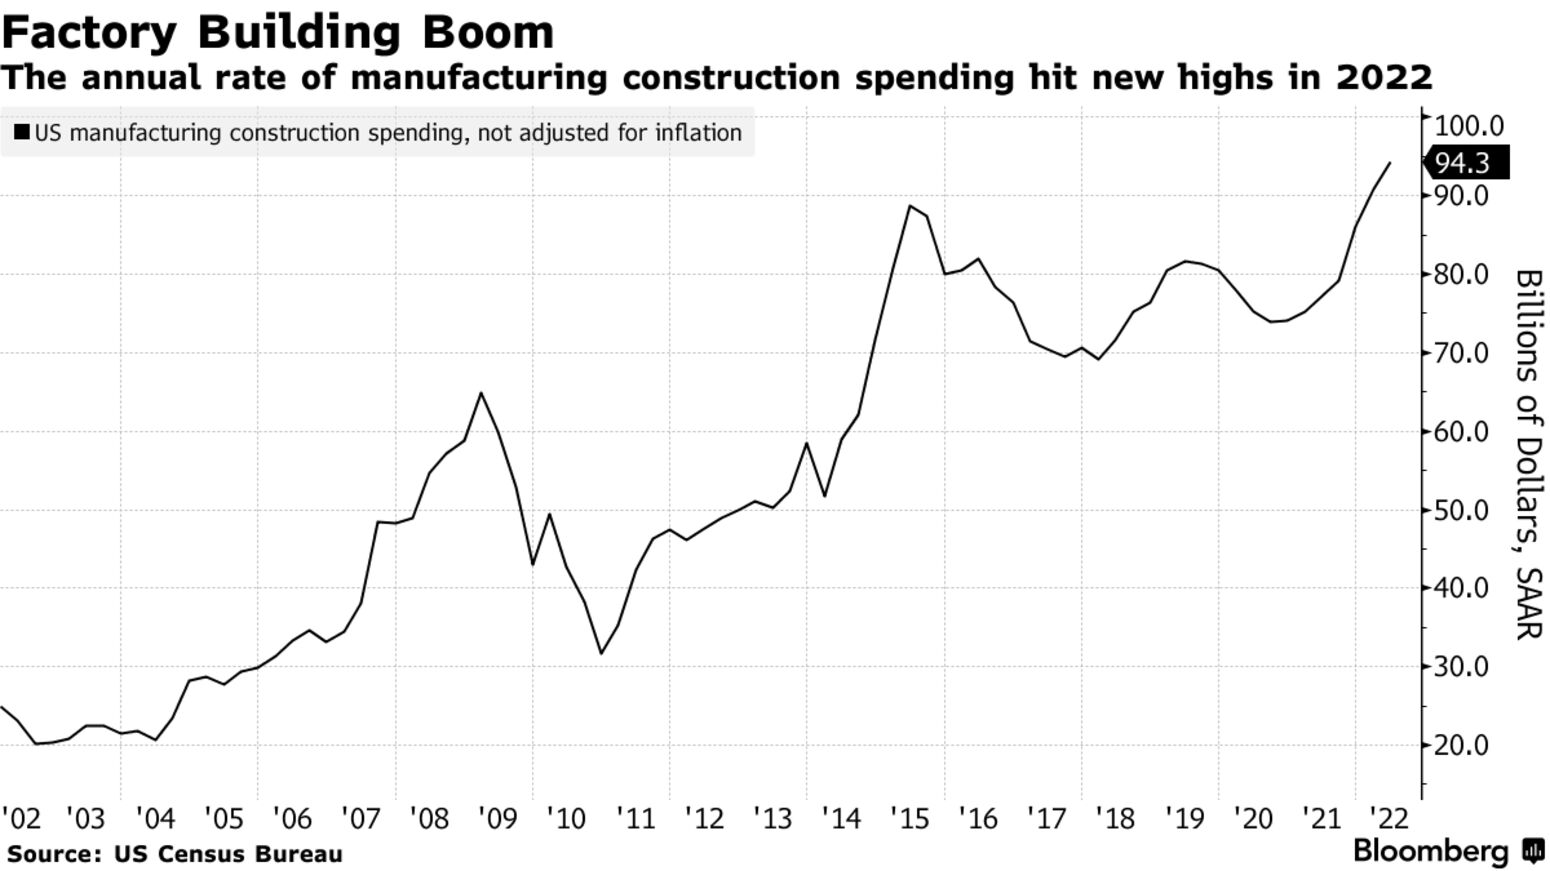 The annual rate of manufacturing construction spending hit new highs in 2022